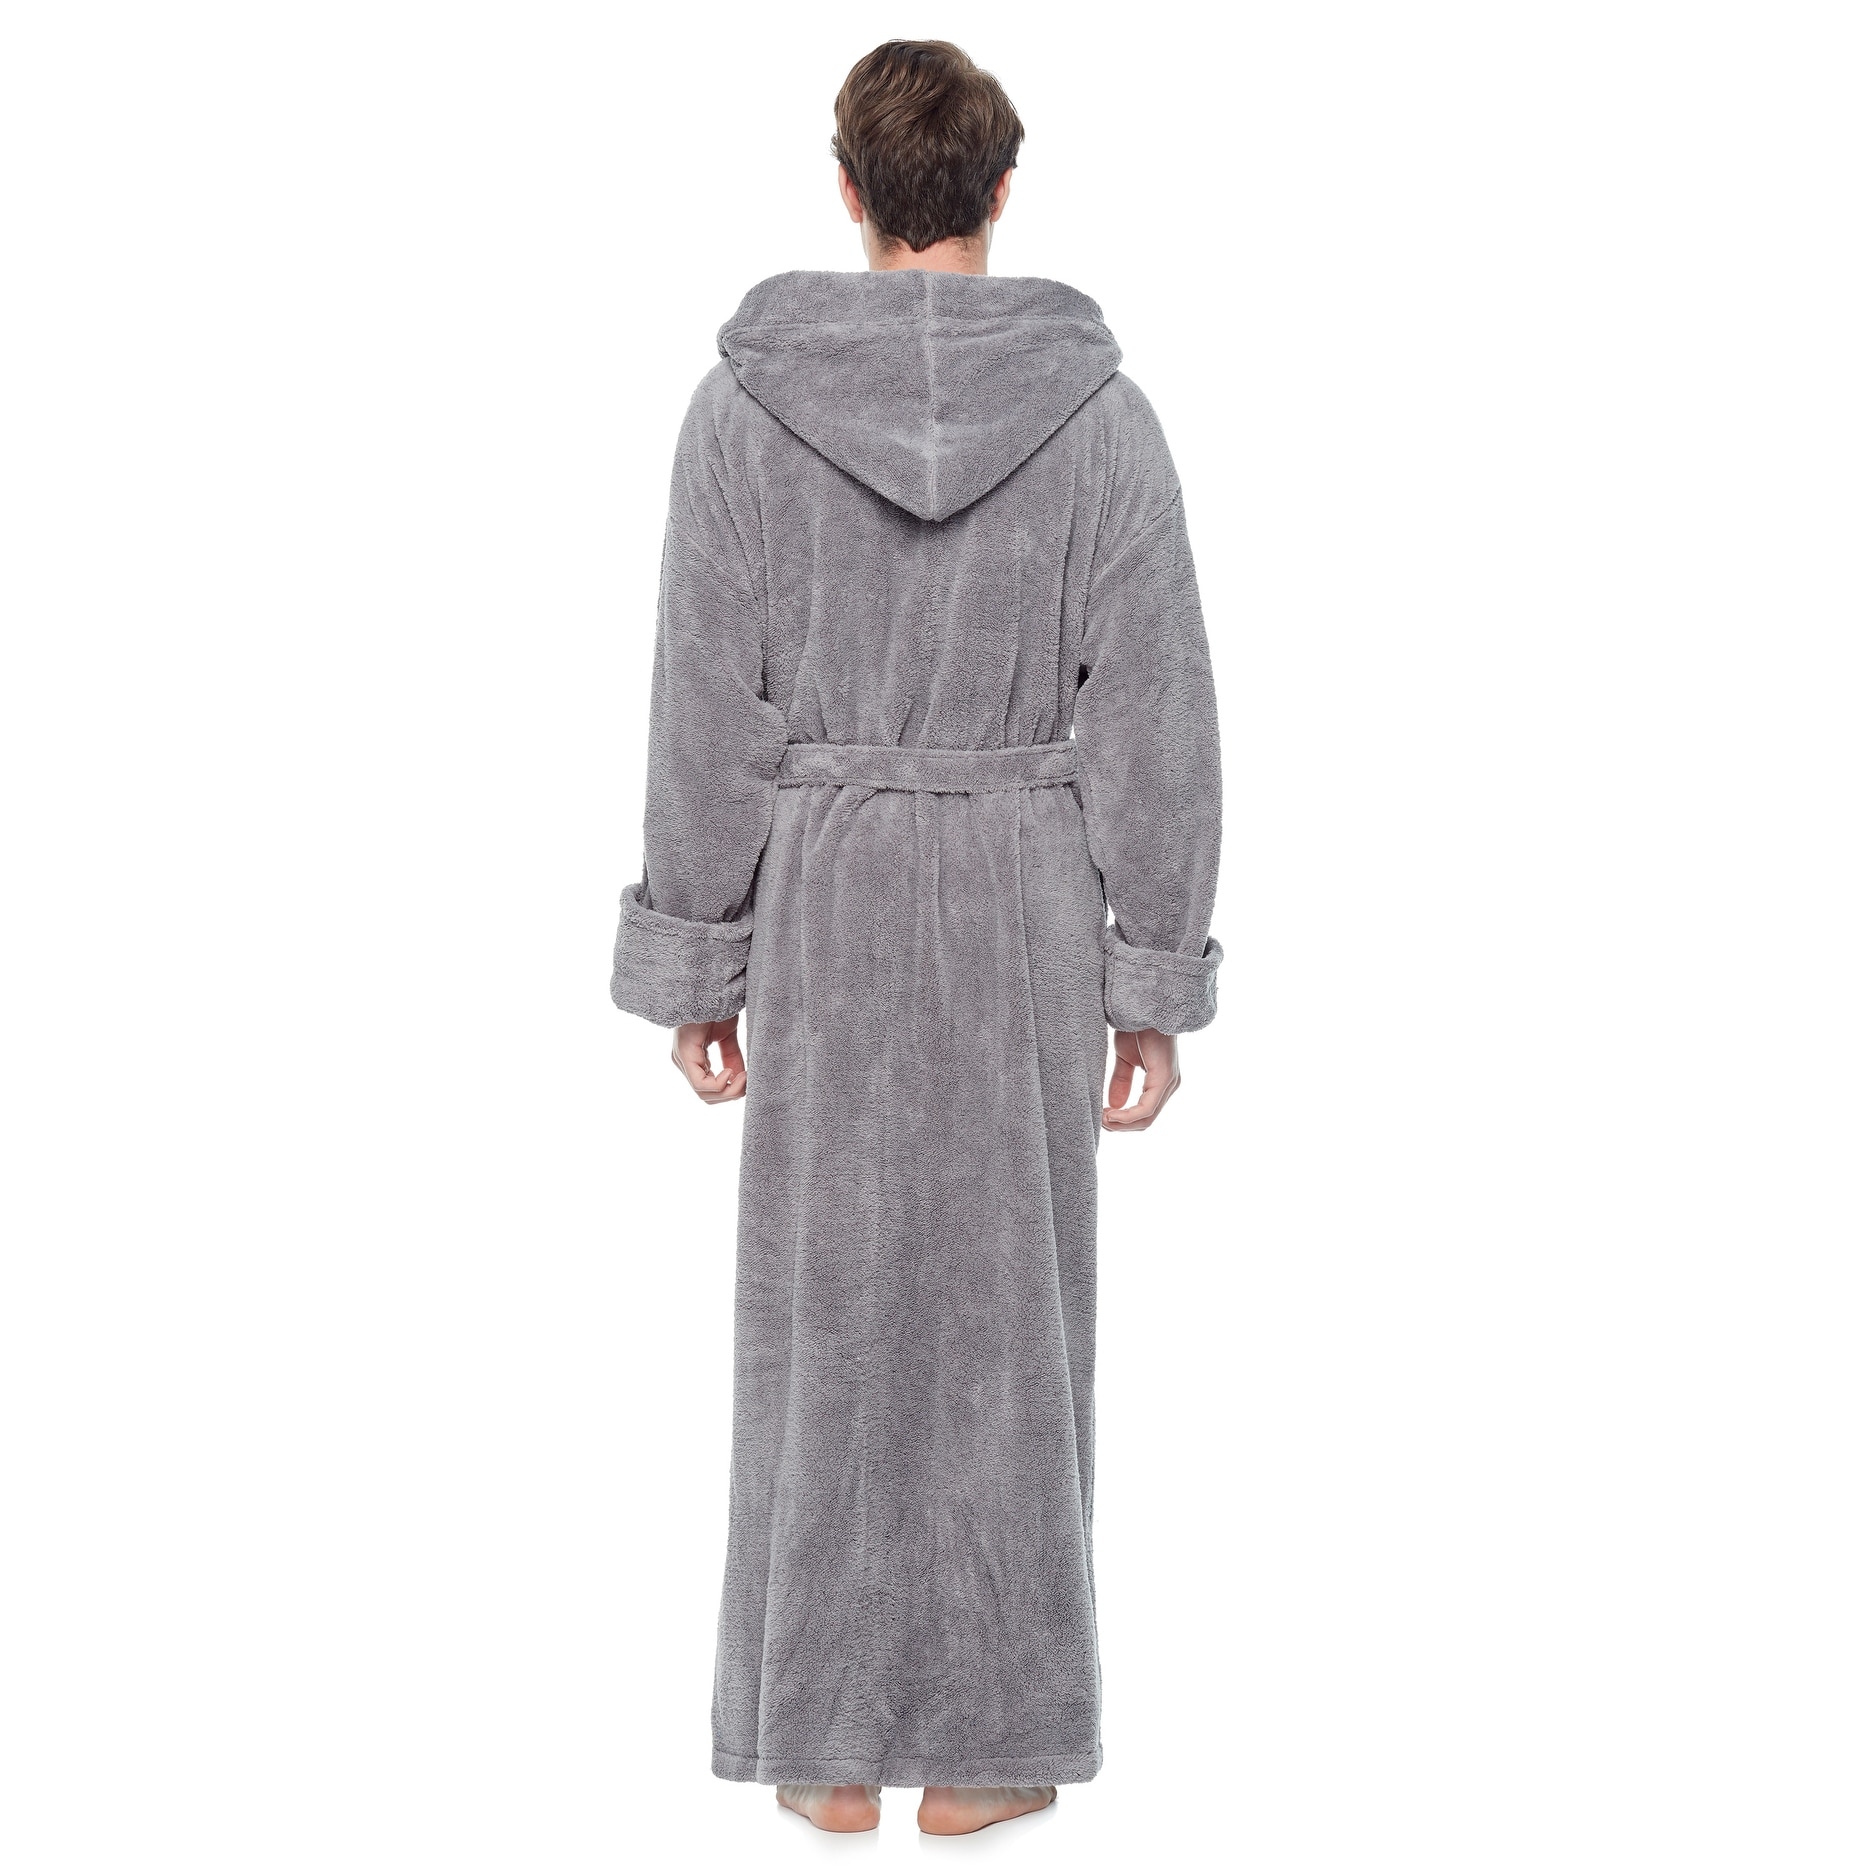 https://ak1.ostkcdn.com/images/products/is/images/direct/c636320e0b3c5e8d8bf3709a85fc1553fd844b5e/Men%27s-Hooded-Fleece-Bathrobe-Turkish-Soft-Plush-Robe-with-Full-Length-Options.jpg